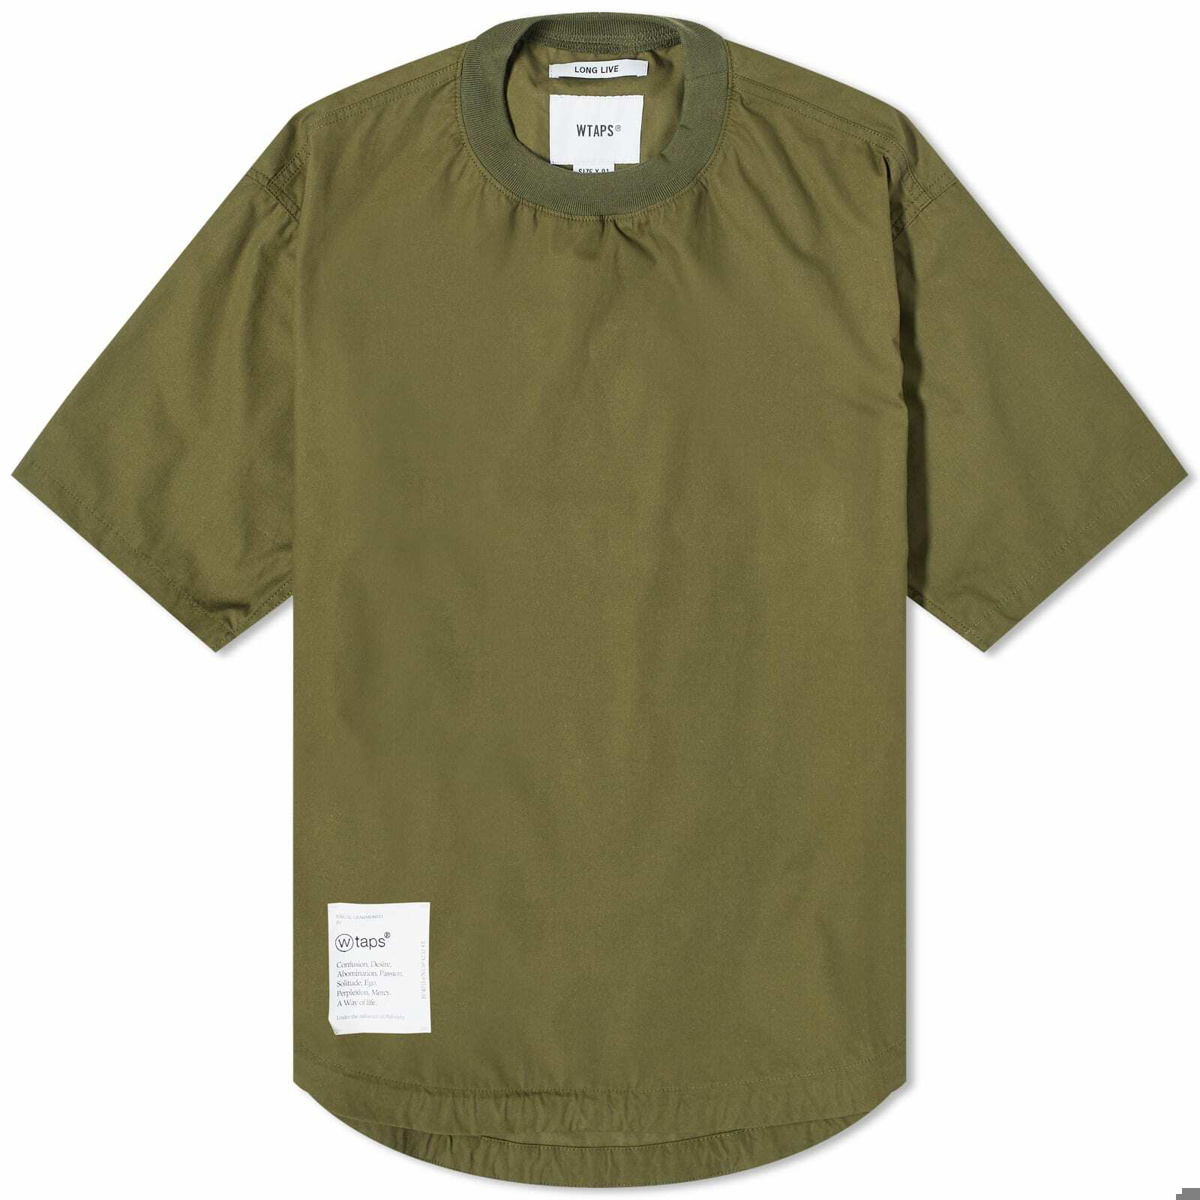 WTAPS Men's 14 Short Sleeve Sweater in Olive Drab WTAPS